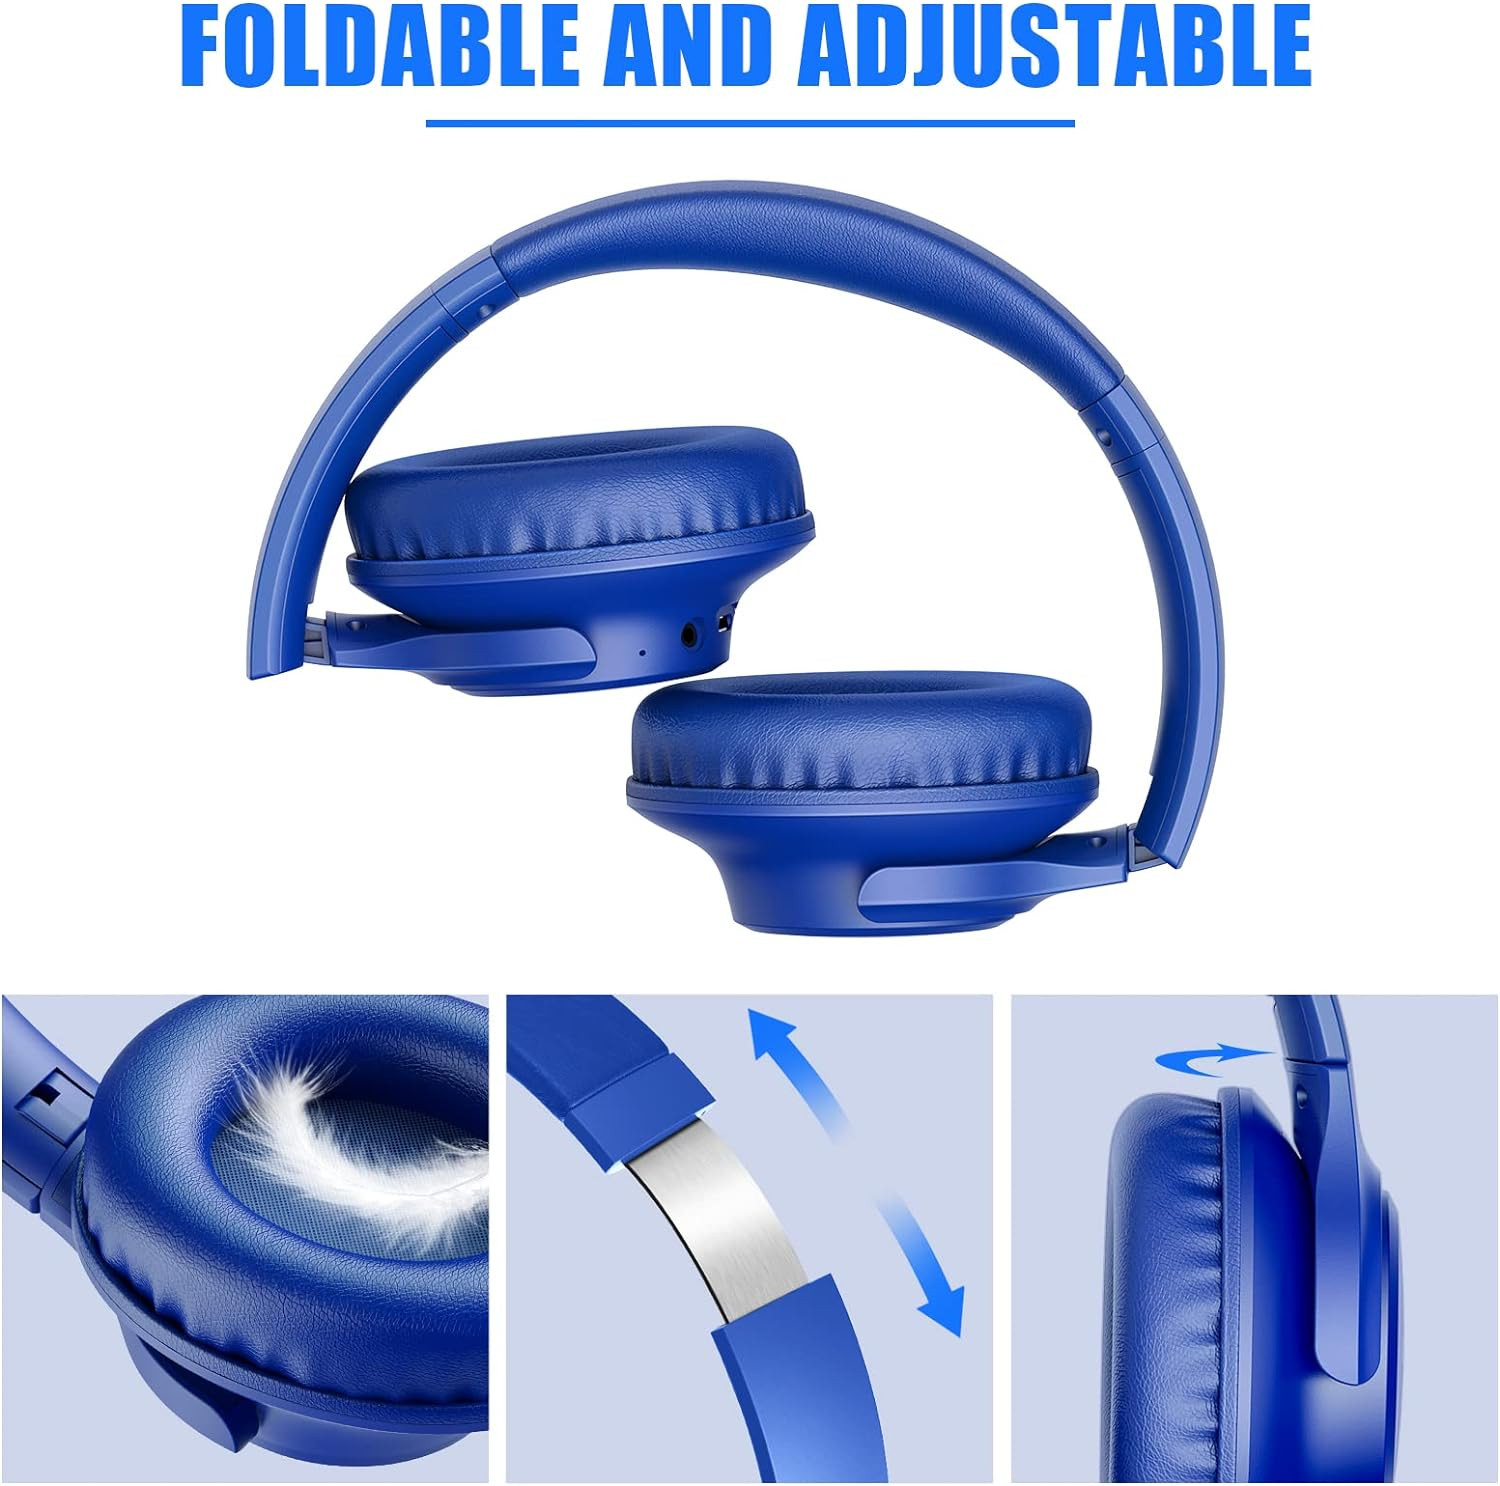 KVIDIO [Updated] Bluetooth Headphones Over Ear, 65 Hours Playtime Wireless Headphones with Microphone,Foldable Lightweight Headset with Deep Bass,HiFi Stereo Sound for Travel Work Cellphone